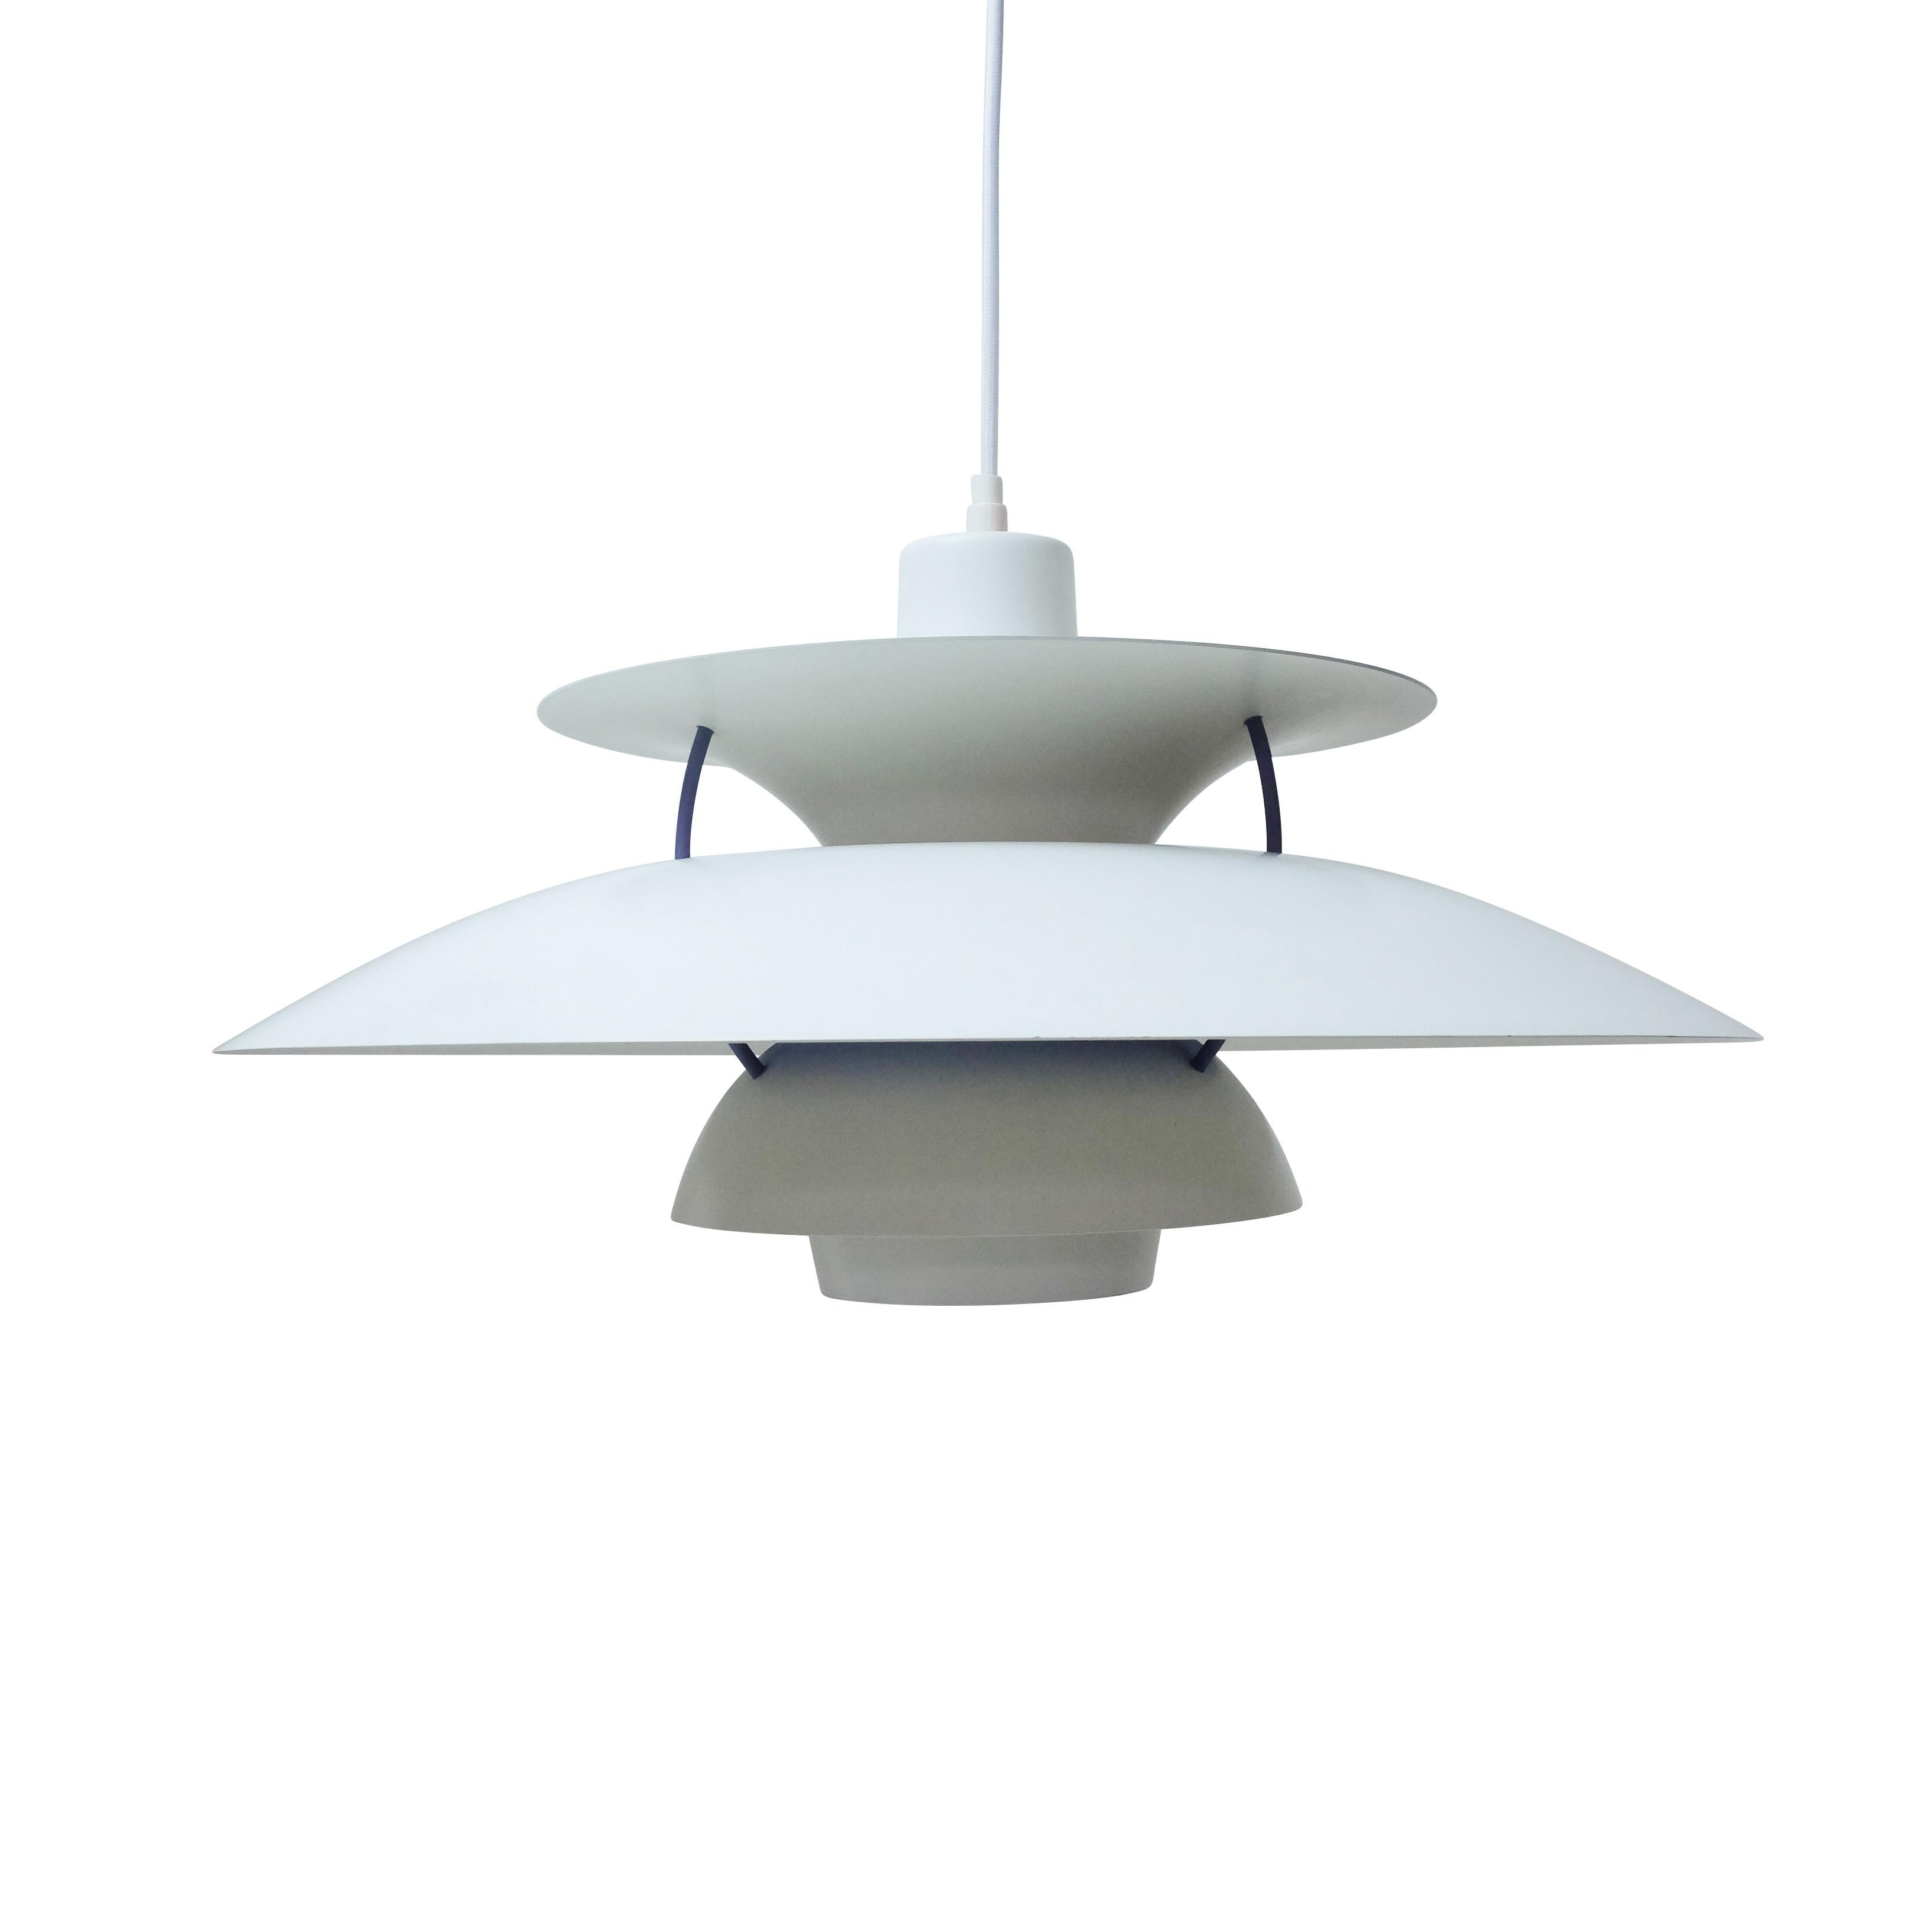 Vintage Poul Henningsen’s PH5 ceiling lamp produced by Louis Poulsen, Denmark.

This lamp is in very good condition, no scratches or noticeable signs of wear, it has been tested and provided with new cotton wiring.